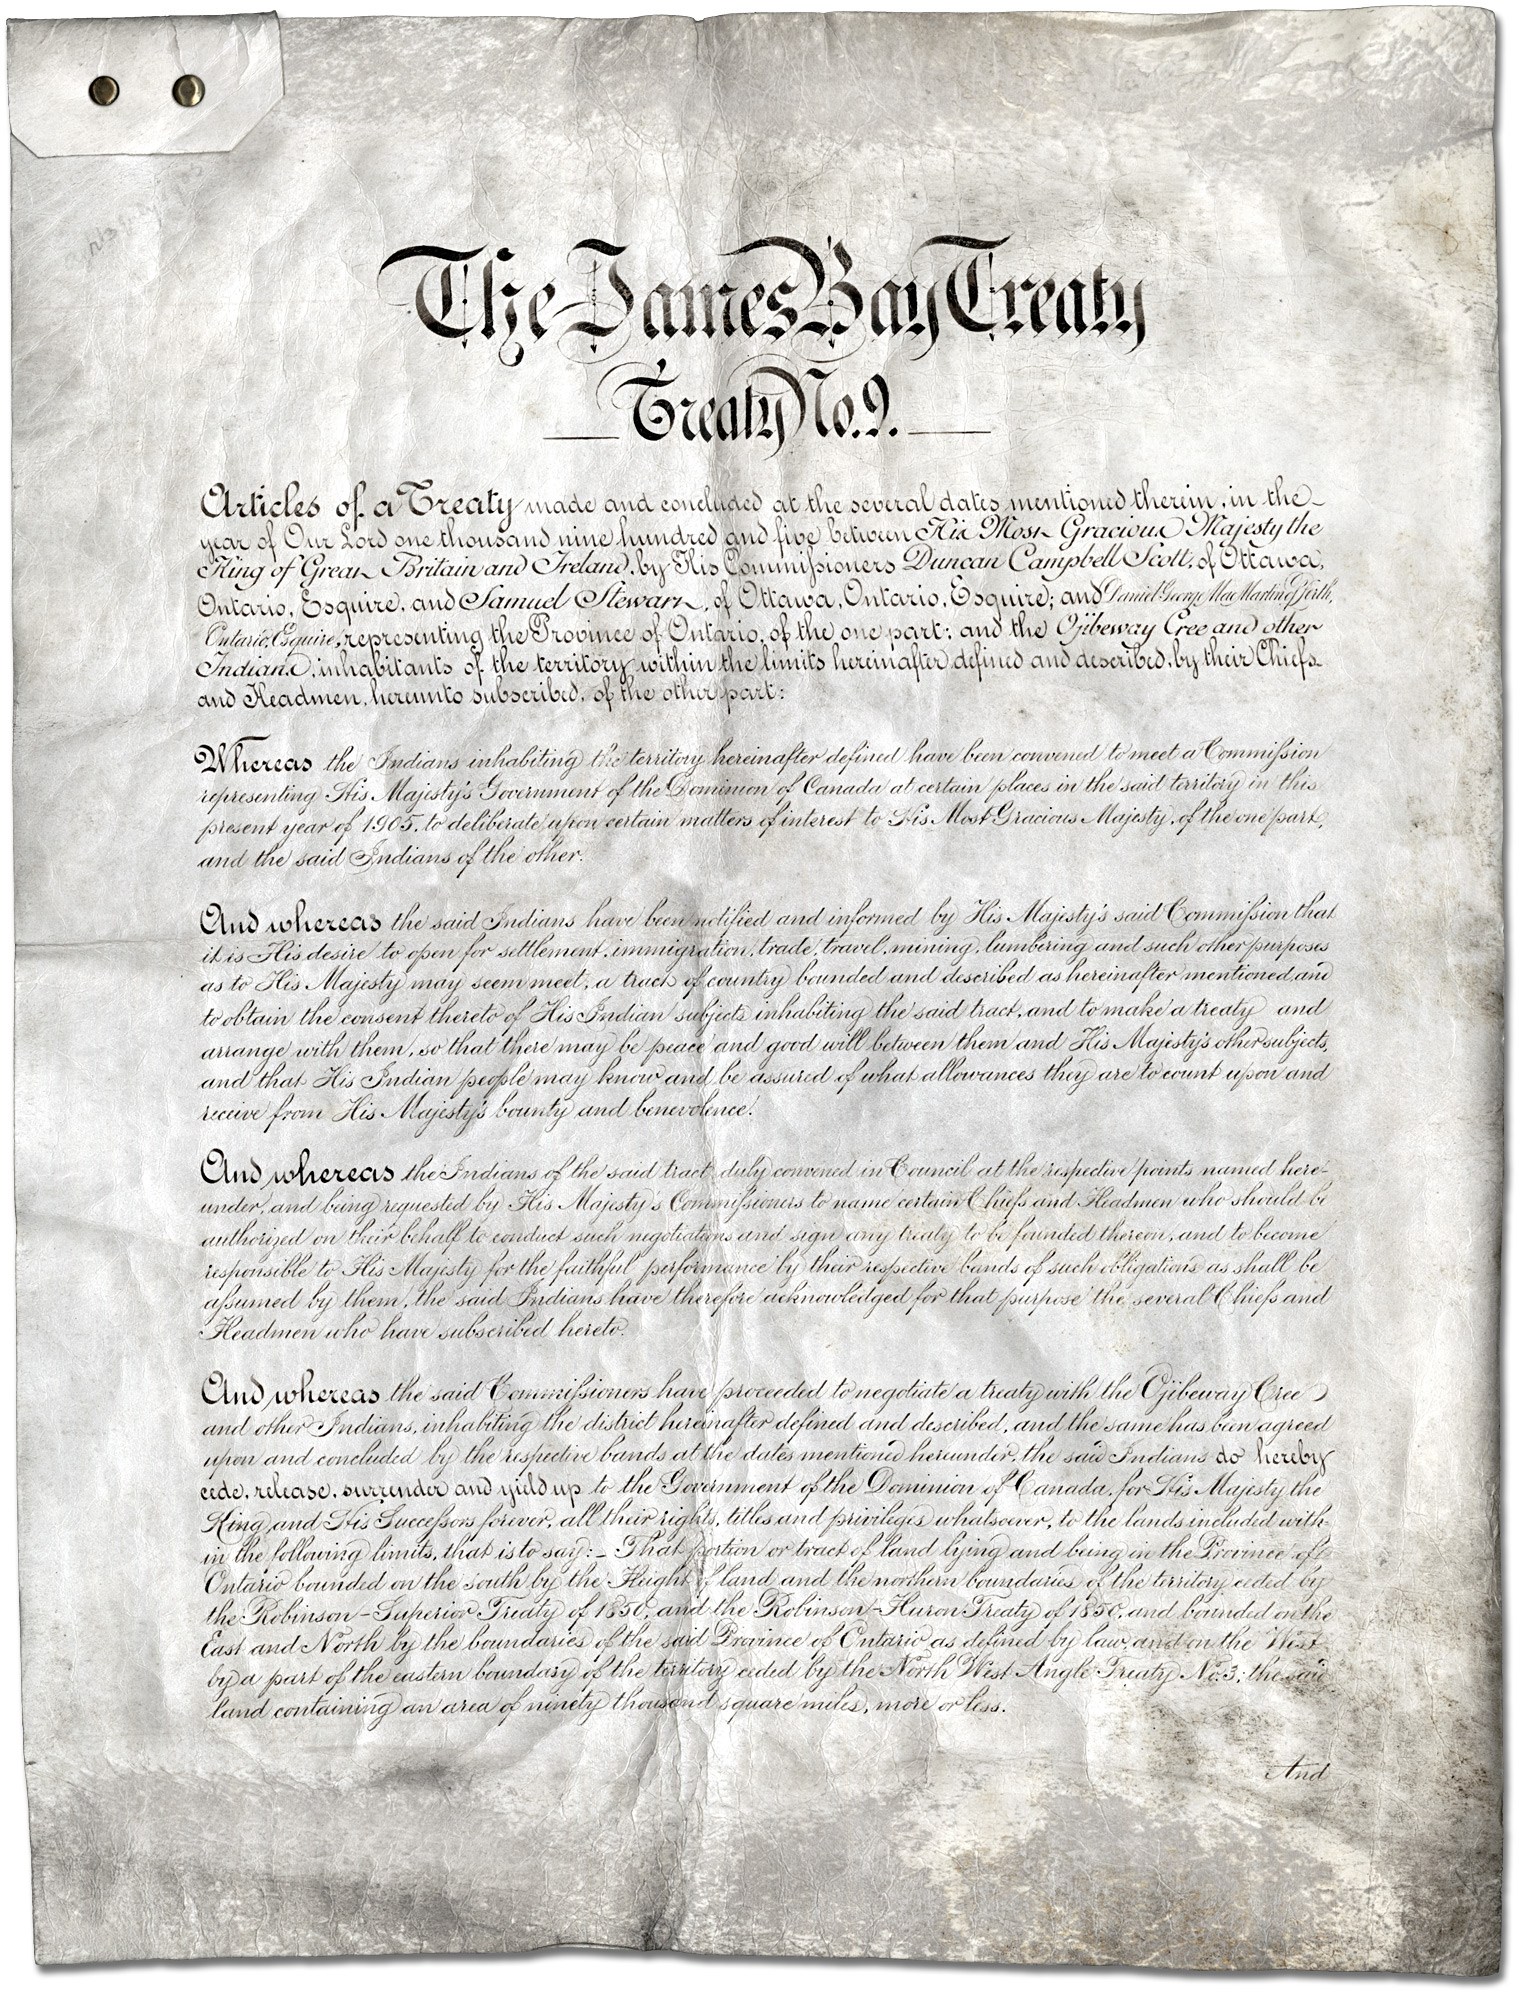 This large piece of paper, possibly parchment, has the oversized title "The James Bay Treaty" with subtitle "__Treaty No. 9__". The body of the text is much smaller, each paragraph preceded with a larger, bolded introductory phrase like "And whereas" The handwriting is done in elegant calligraphy. There is a small piece of material with two snaps or holes attached to the top left of the page.